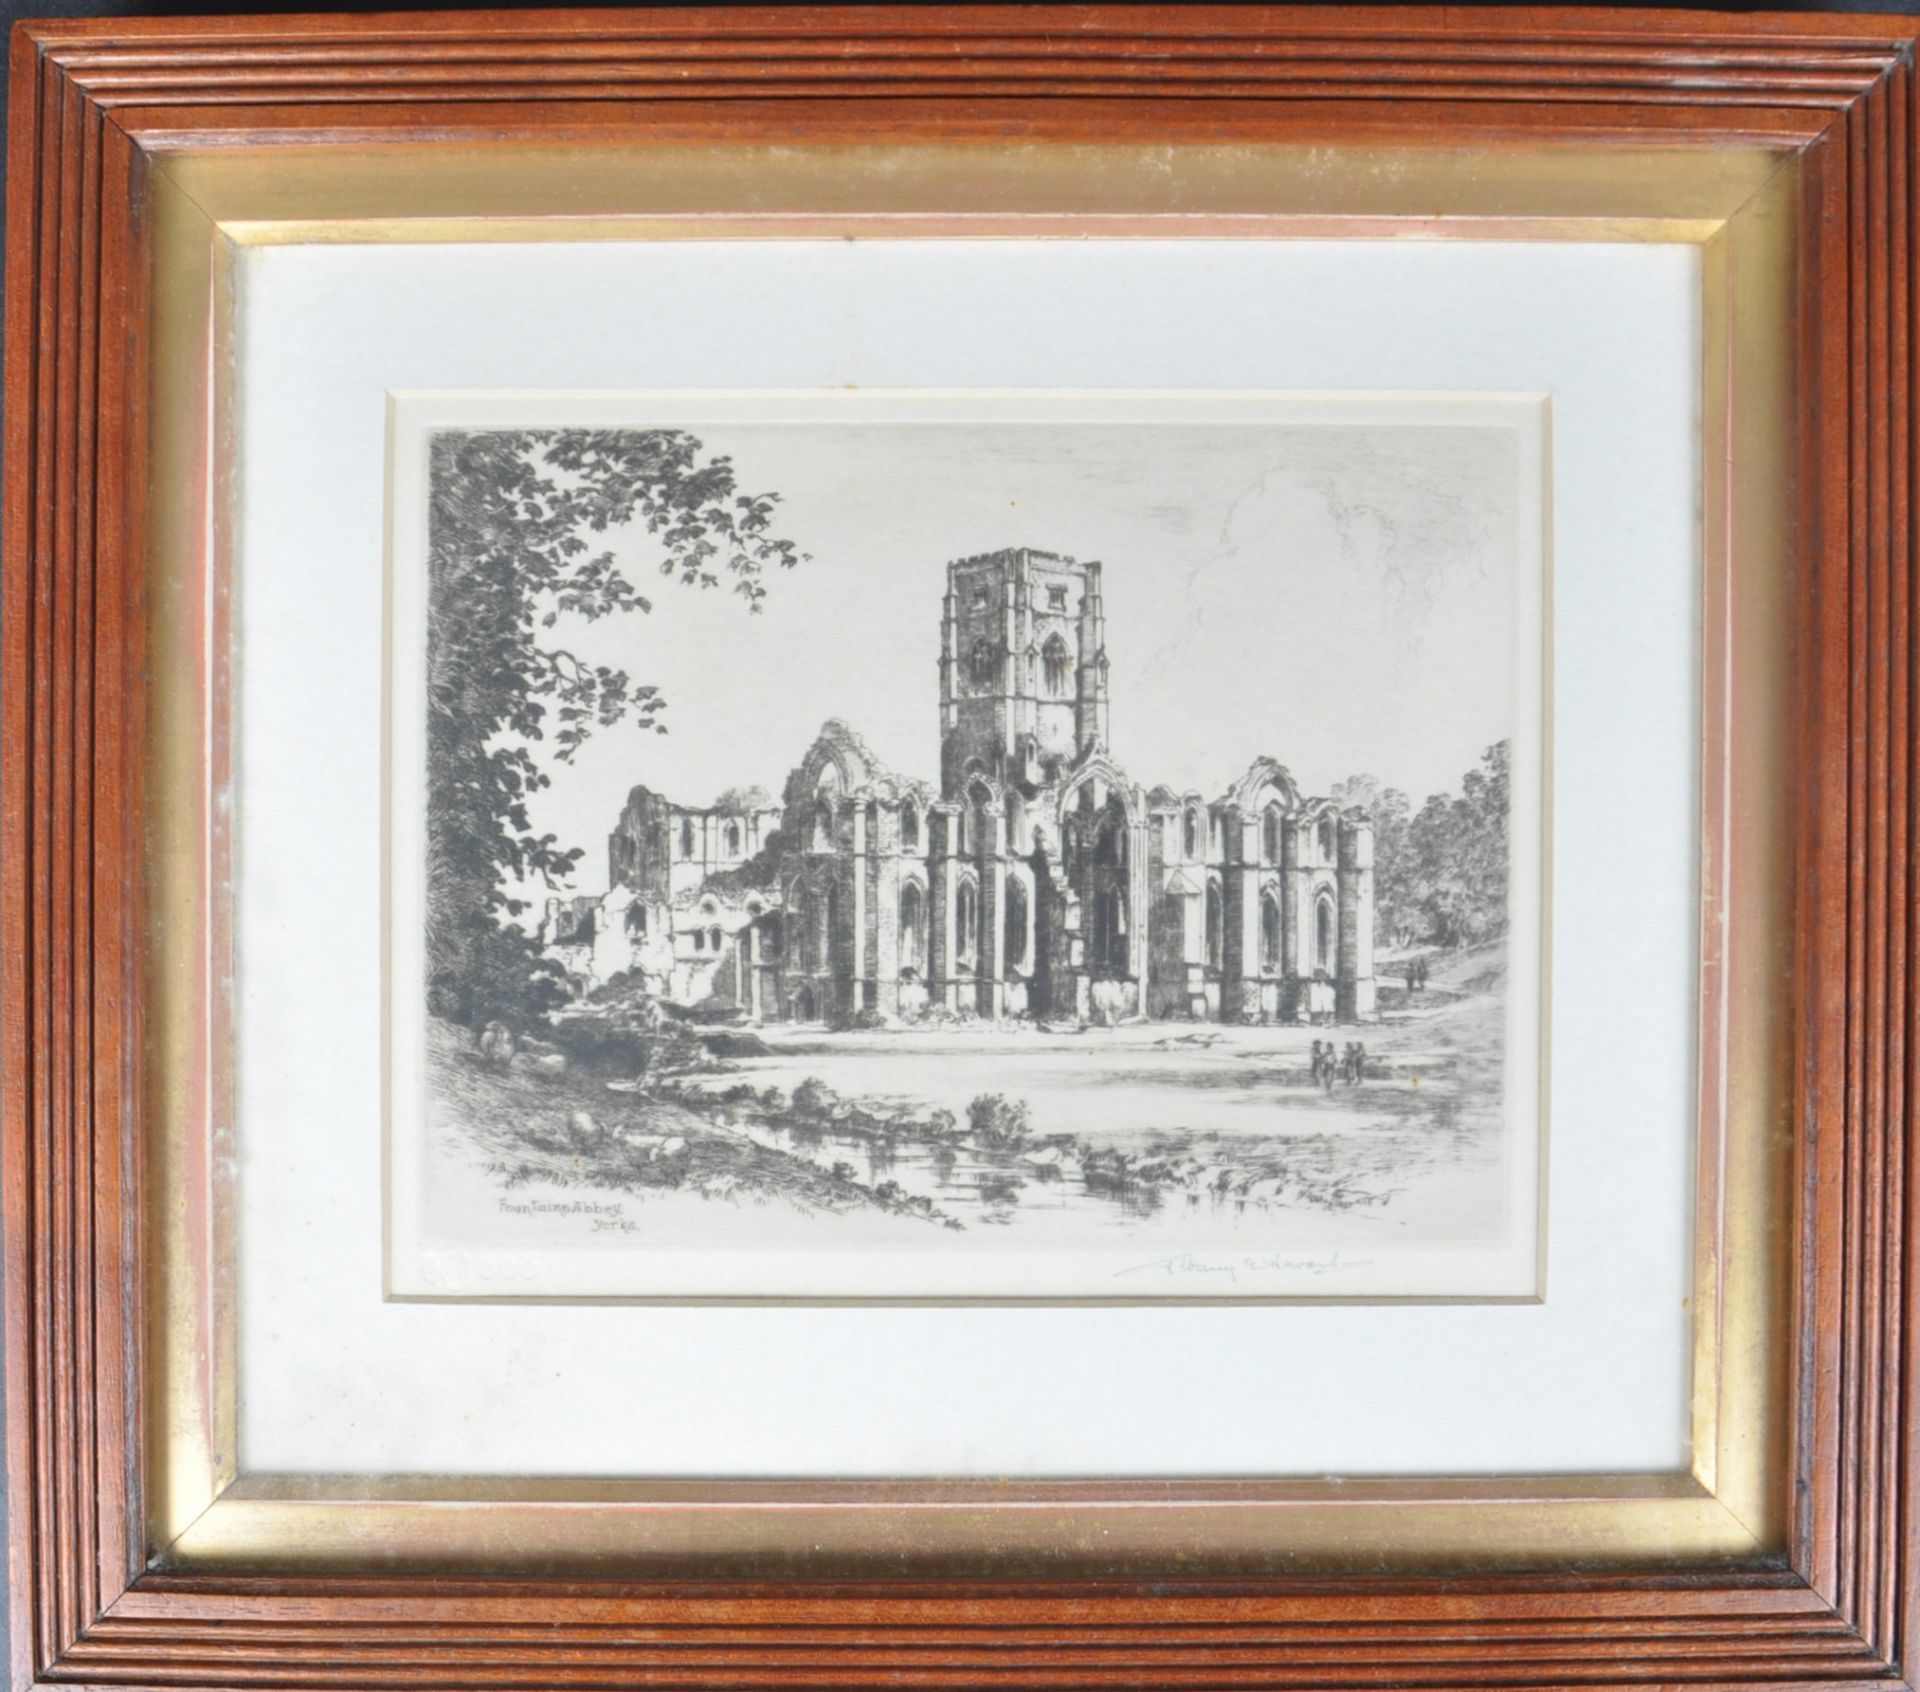 FOUNTAINS ABBEY YORKS ETCHING BY ALBANY EDWARDS